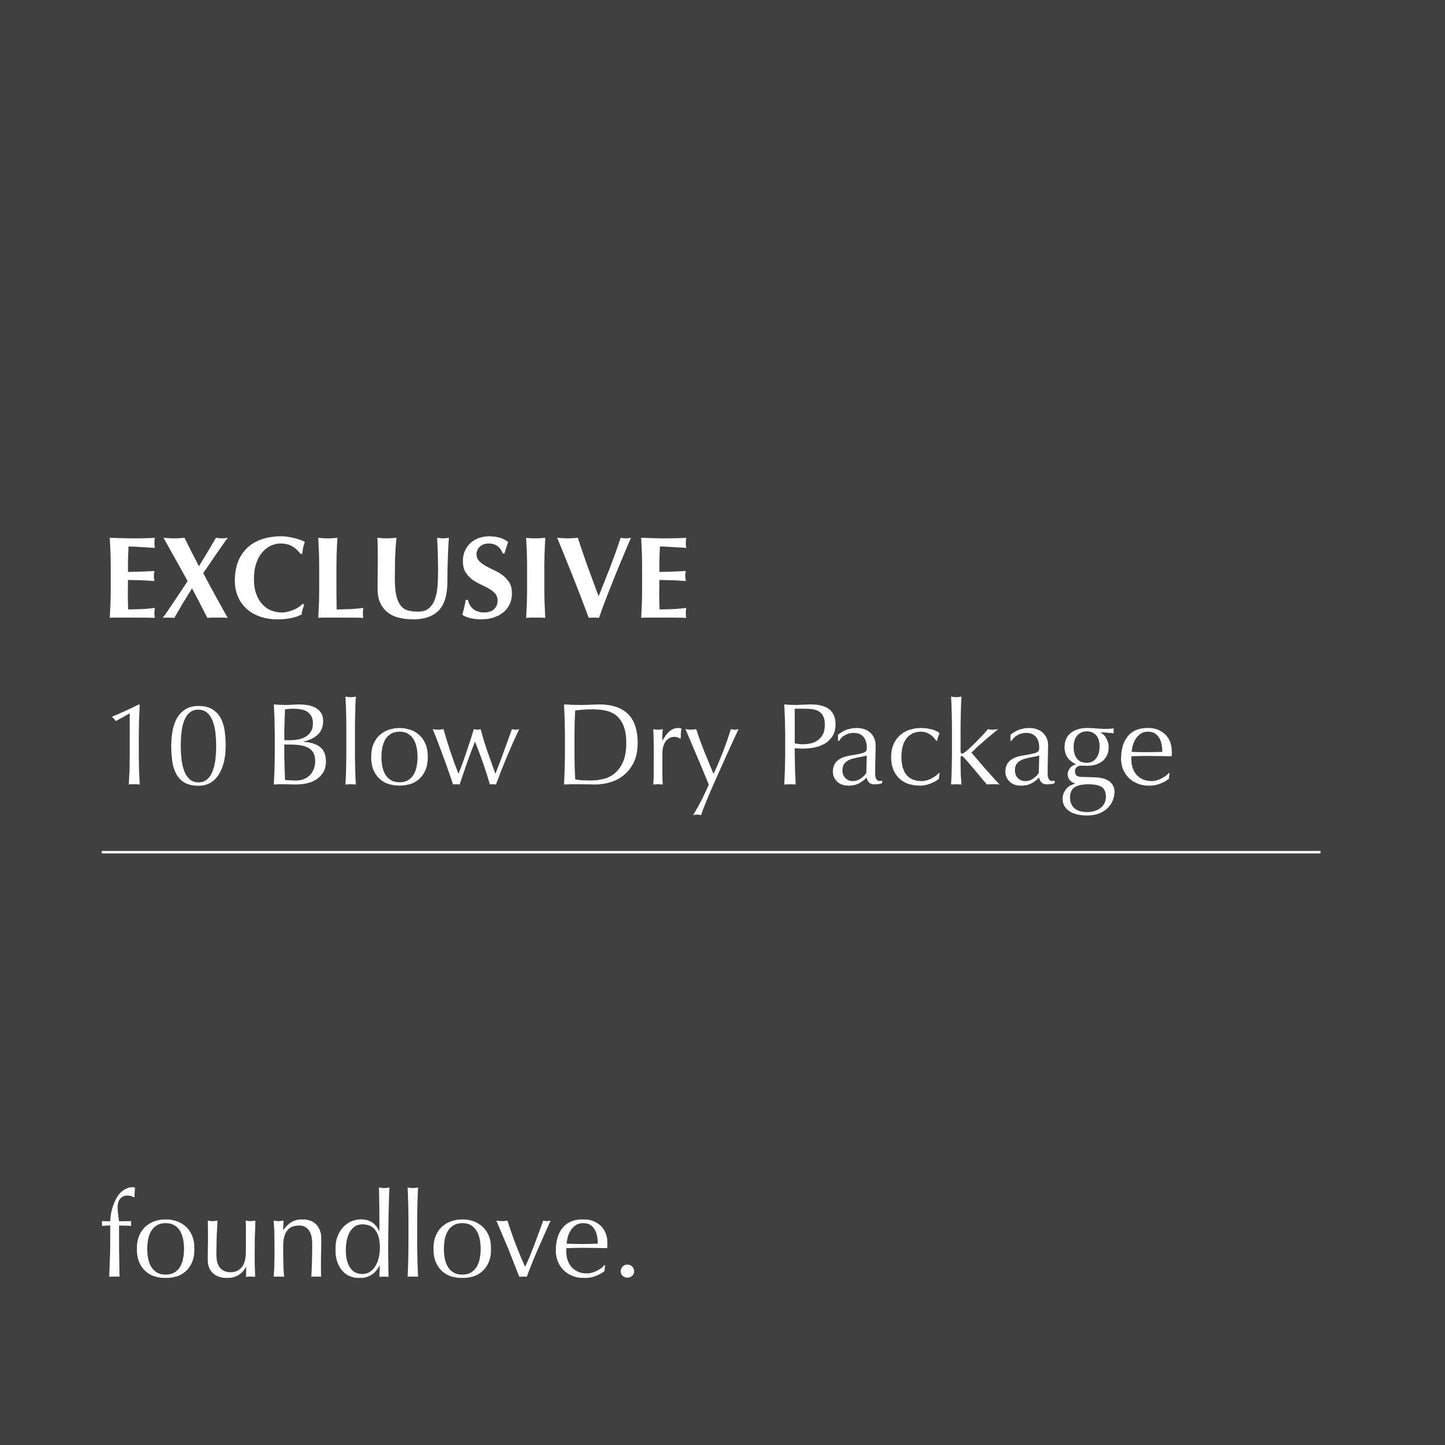 10 Blow Dry Package